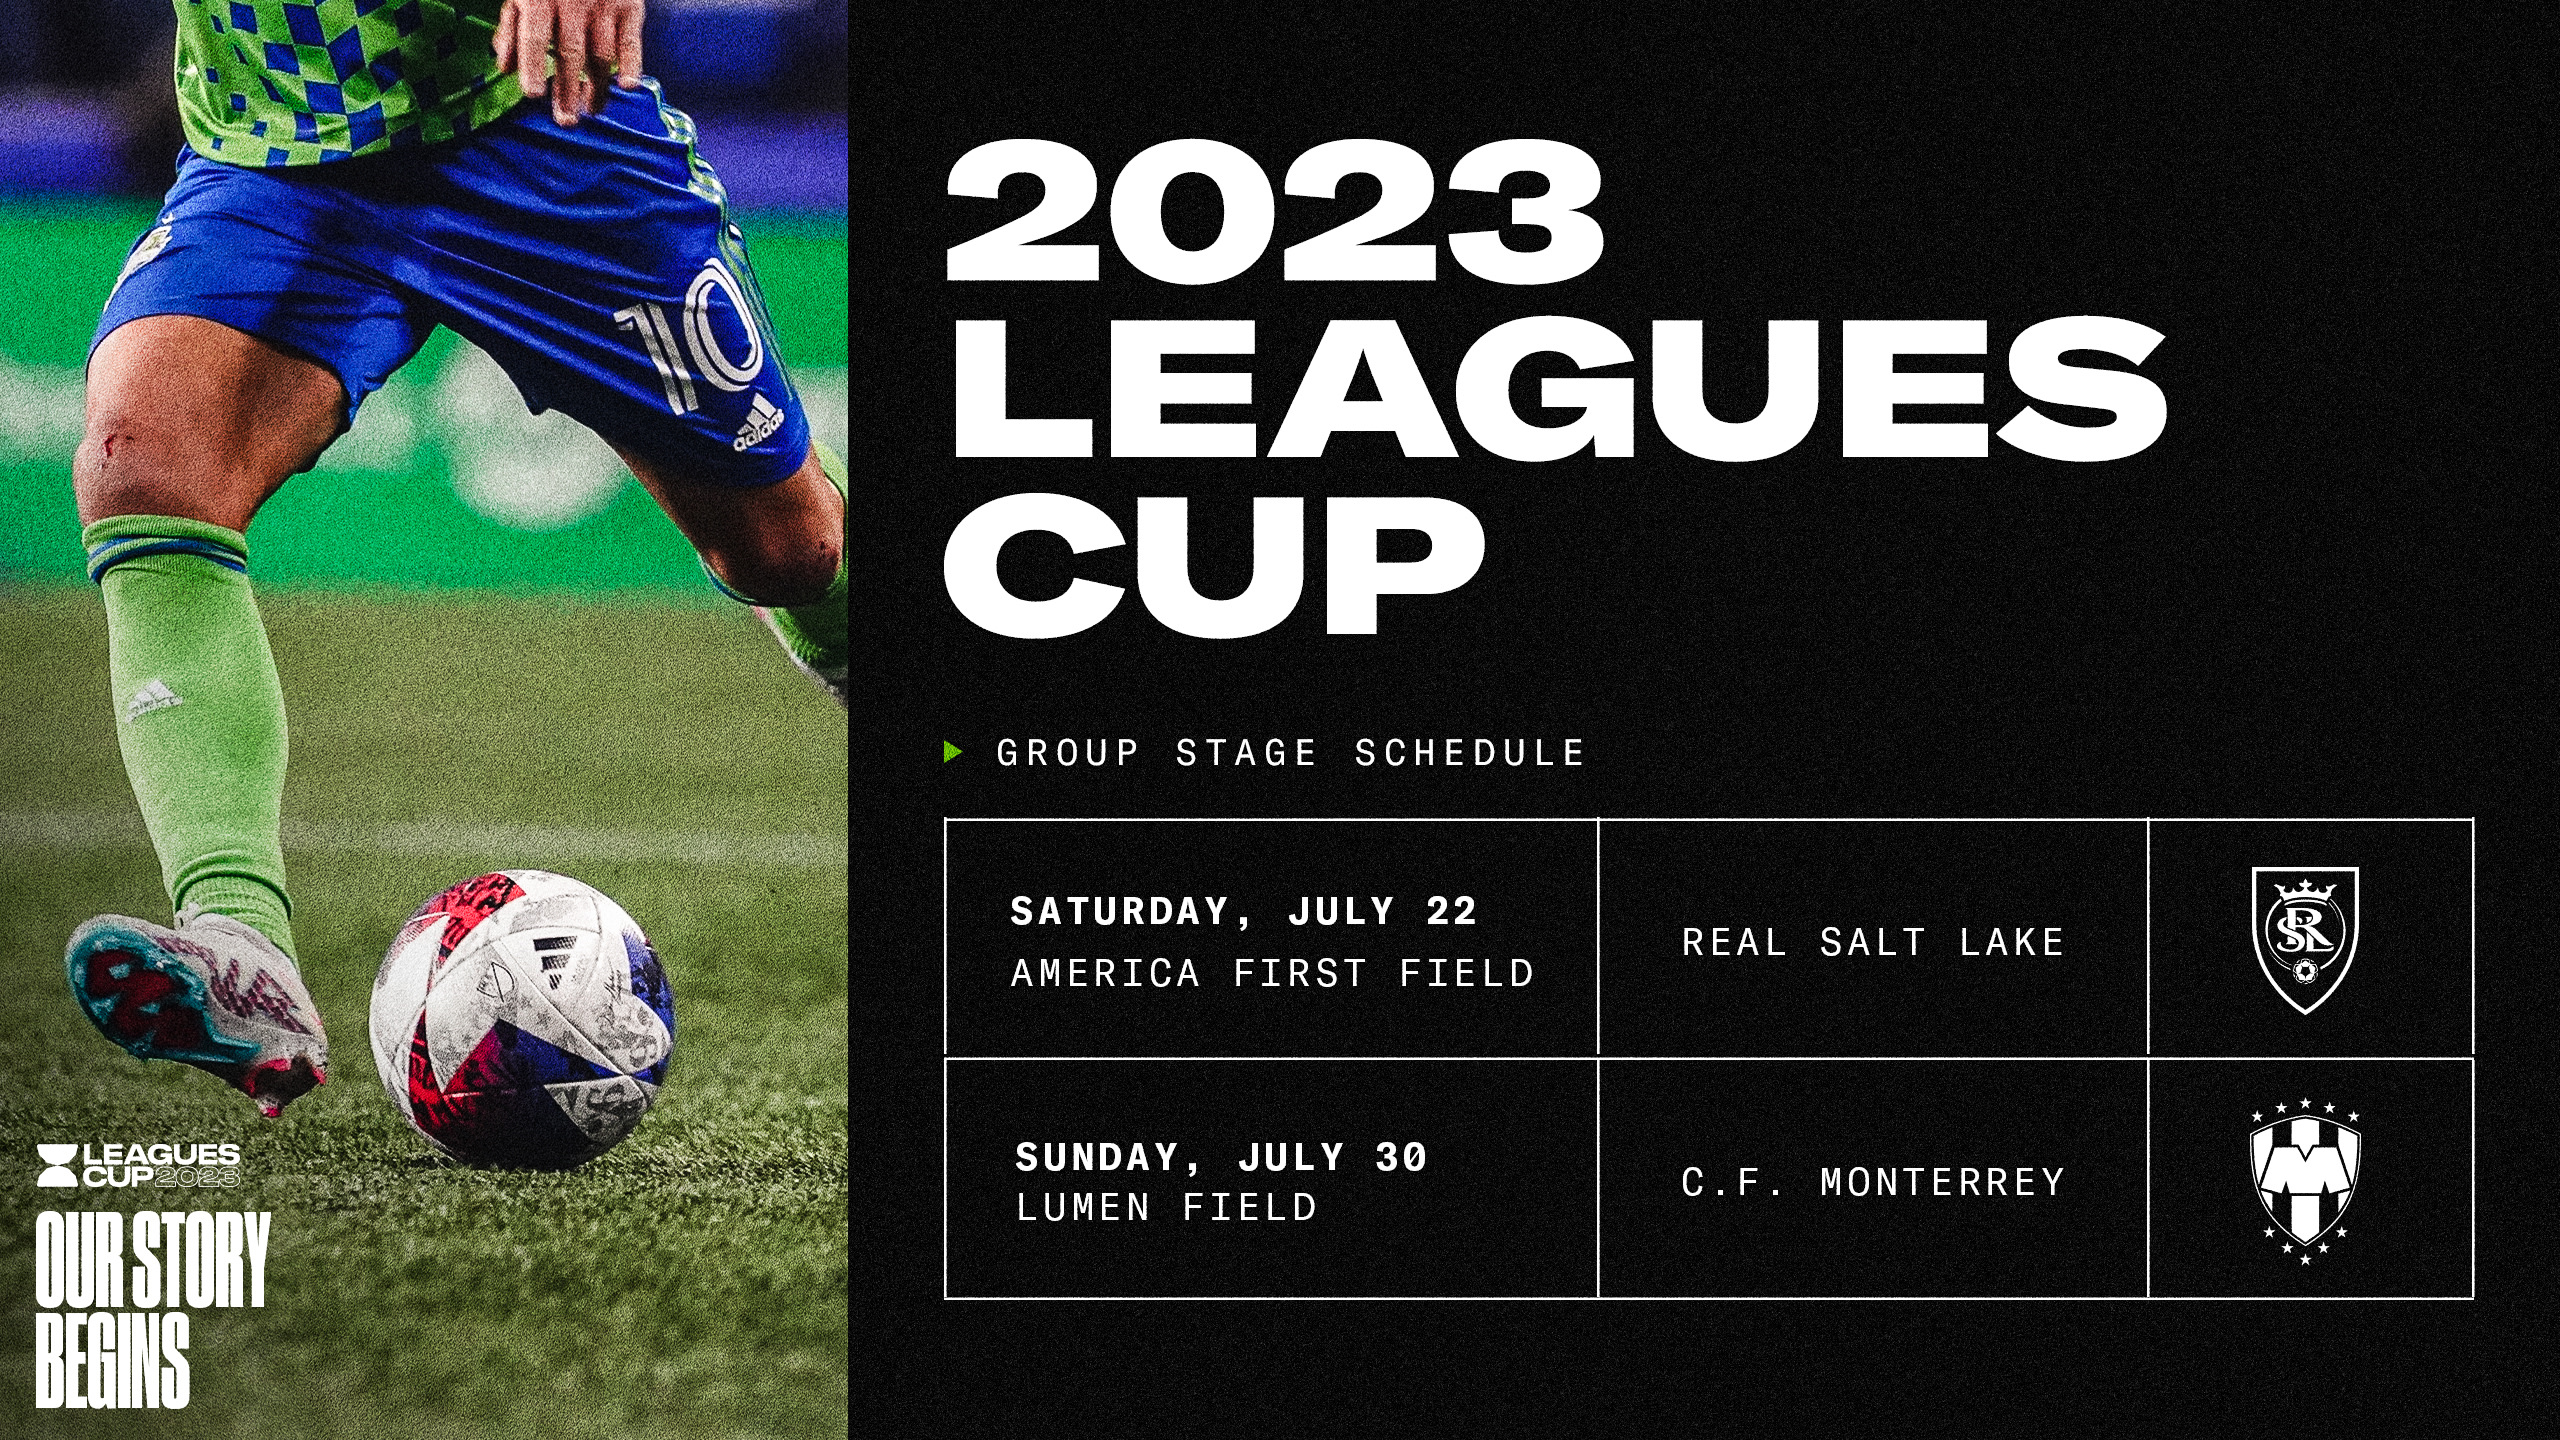 Leagues Cup 2023 kickoff times announced for group stage matches